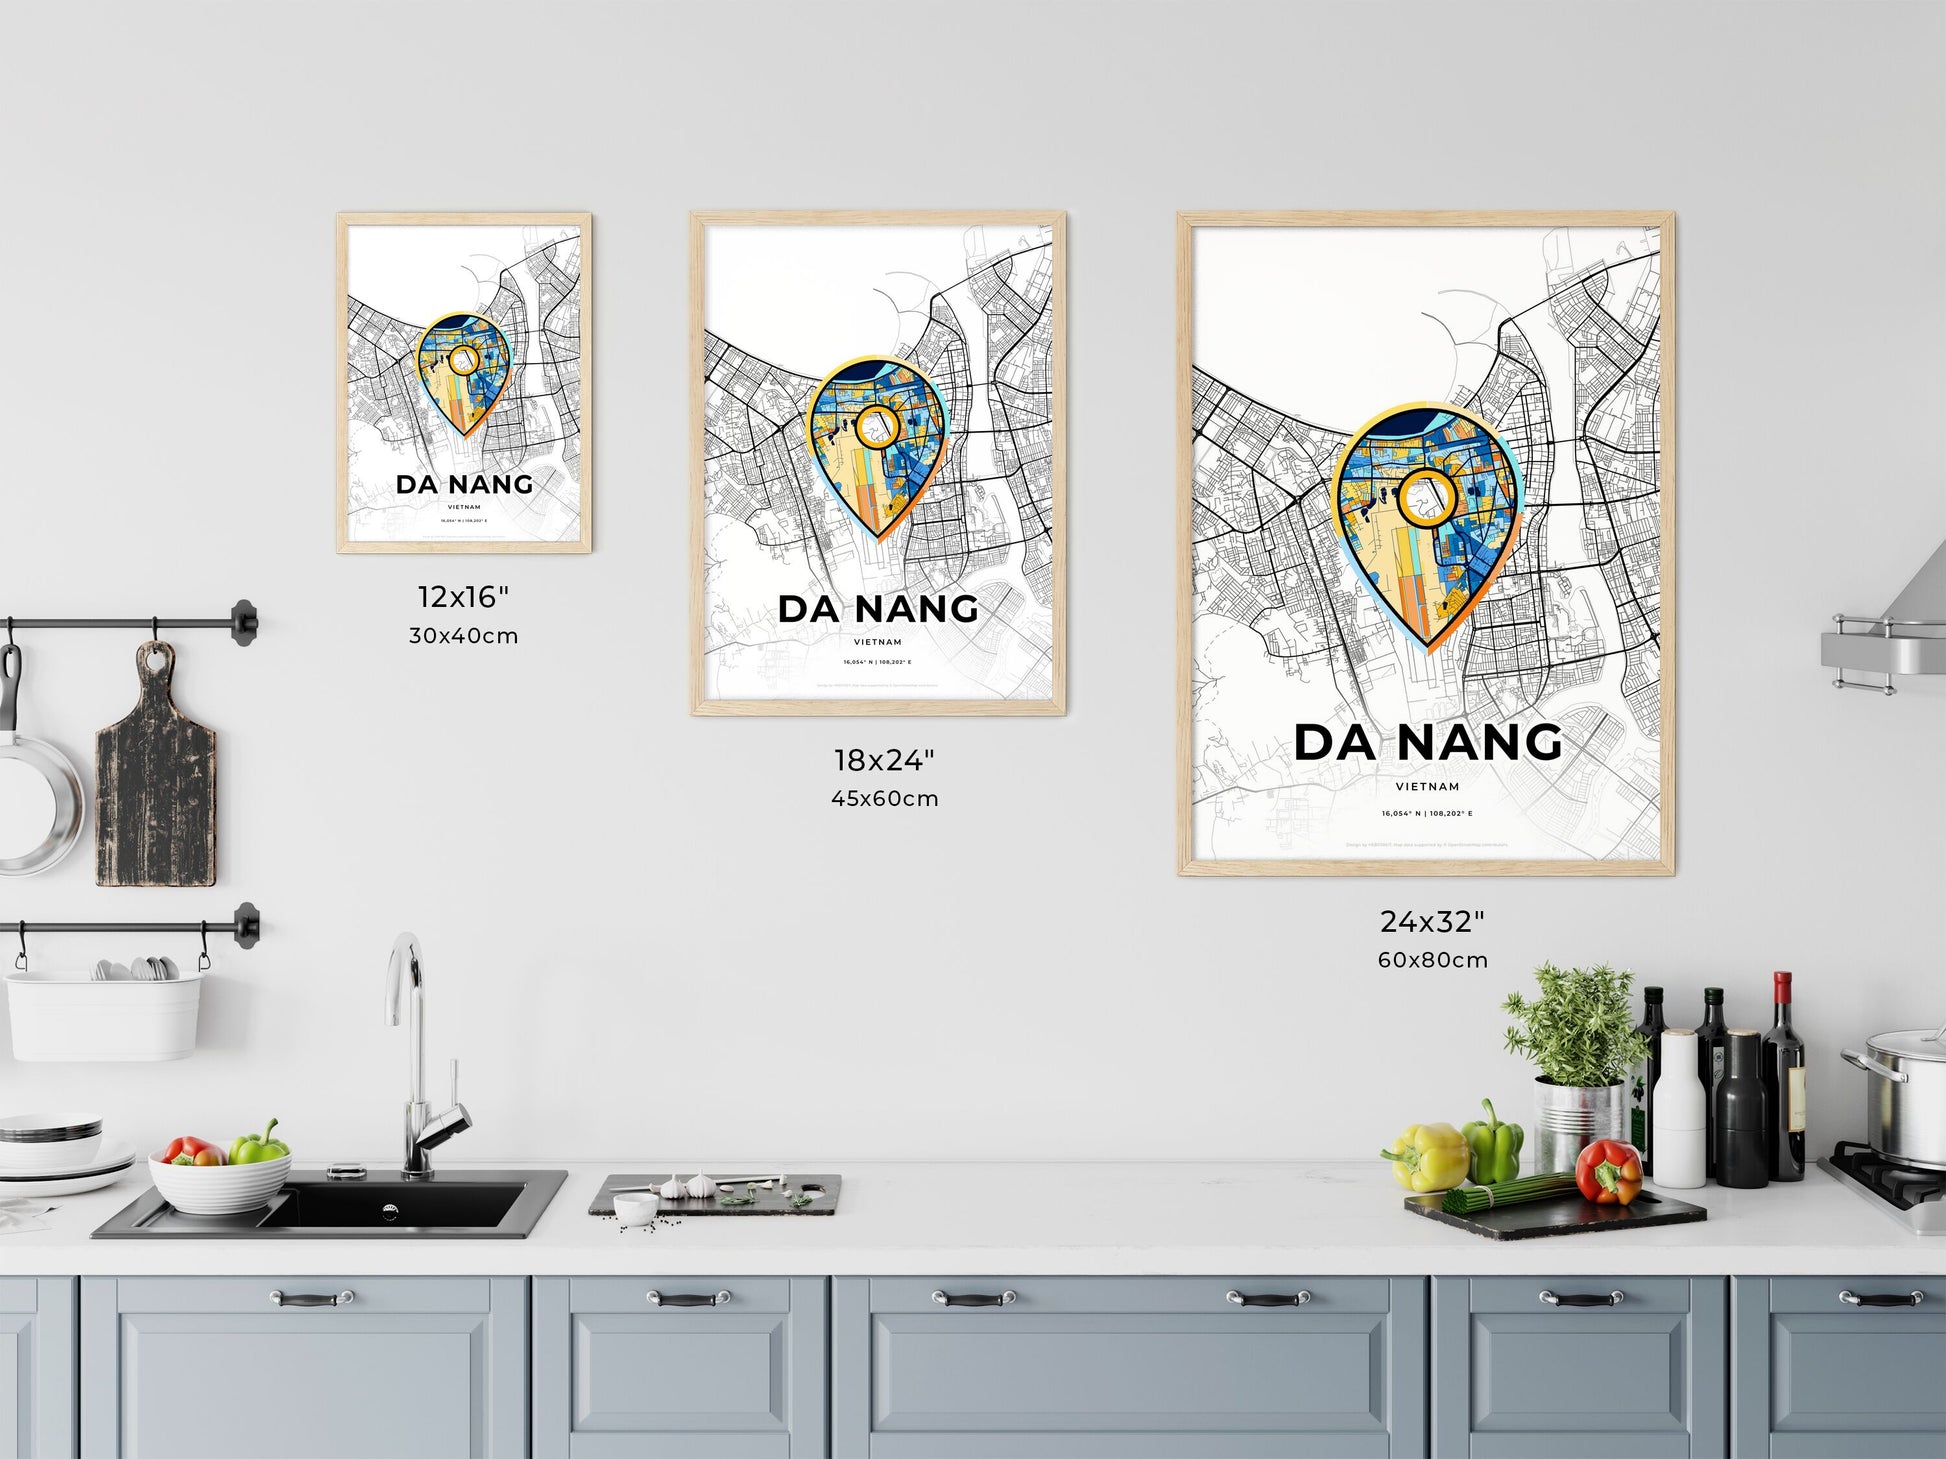 DA NANG VIETNAM minimal art map with a colorful icon. Where it all began, Couple map gift.